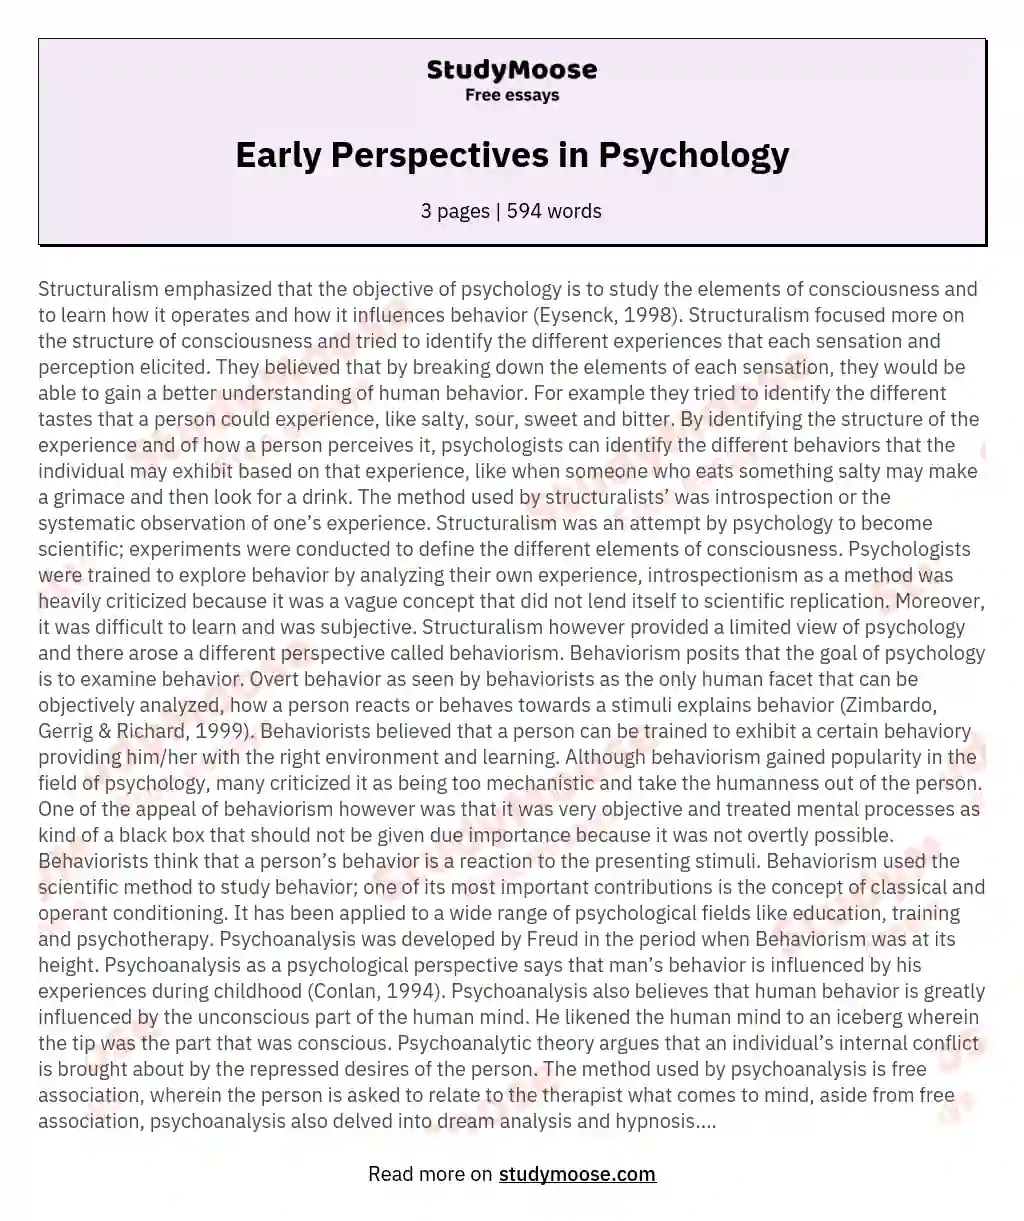 Early Perspectives in Psychology essay